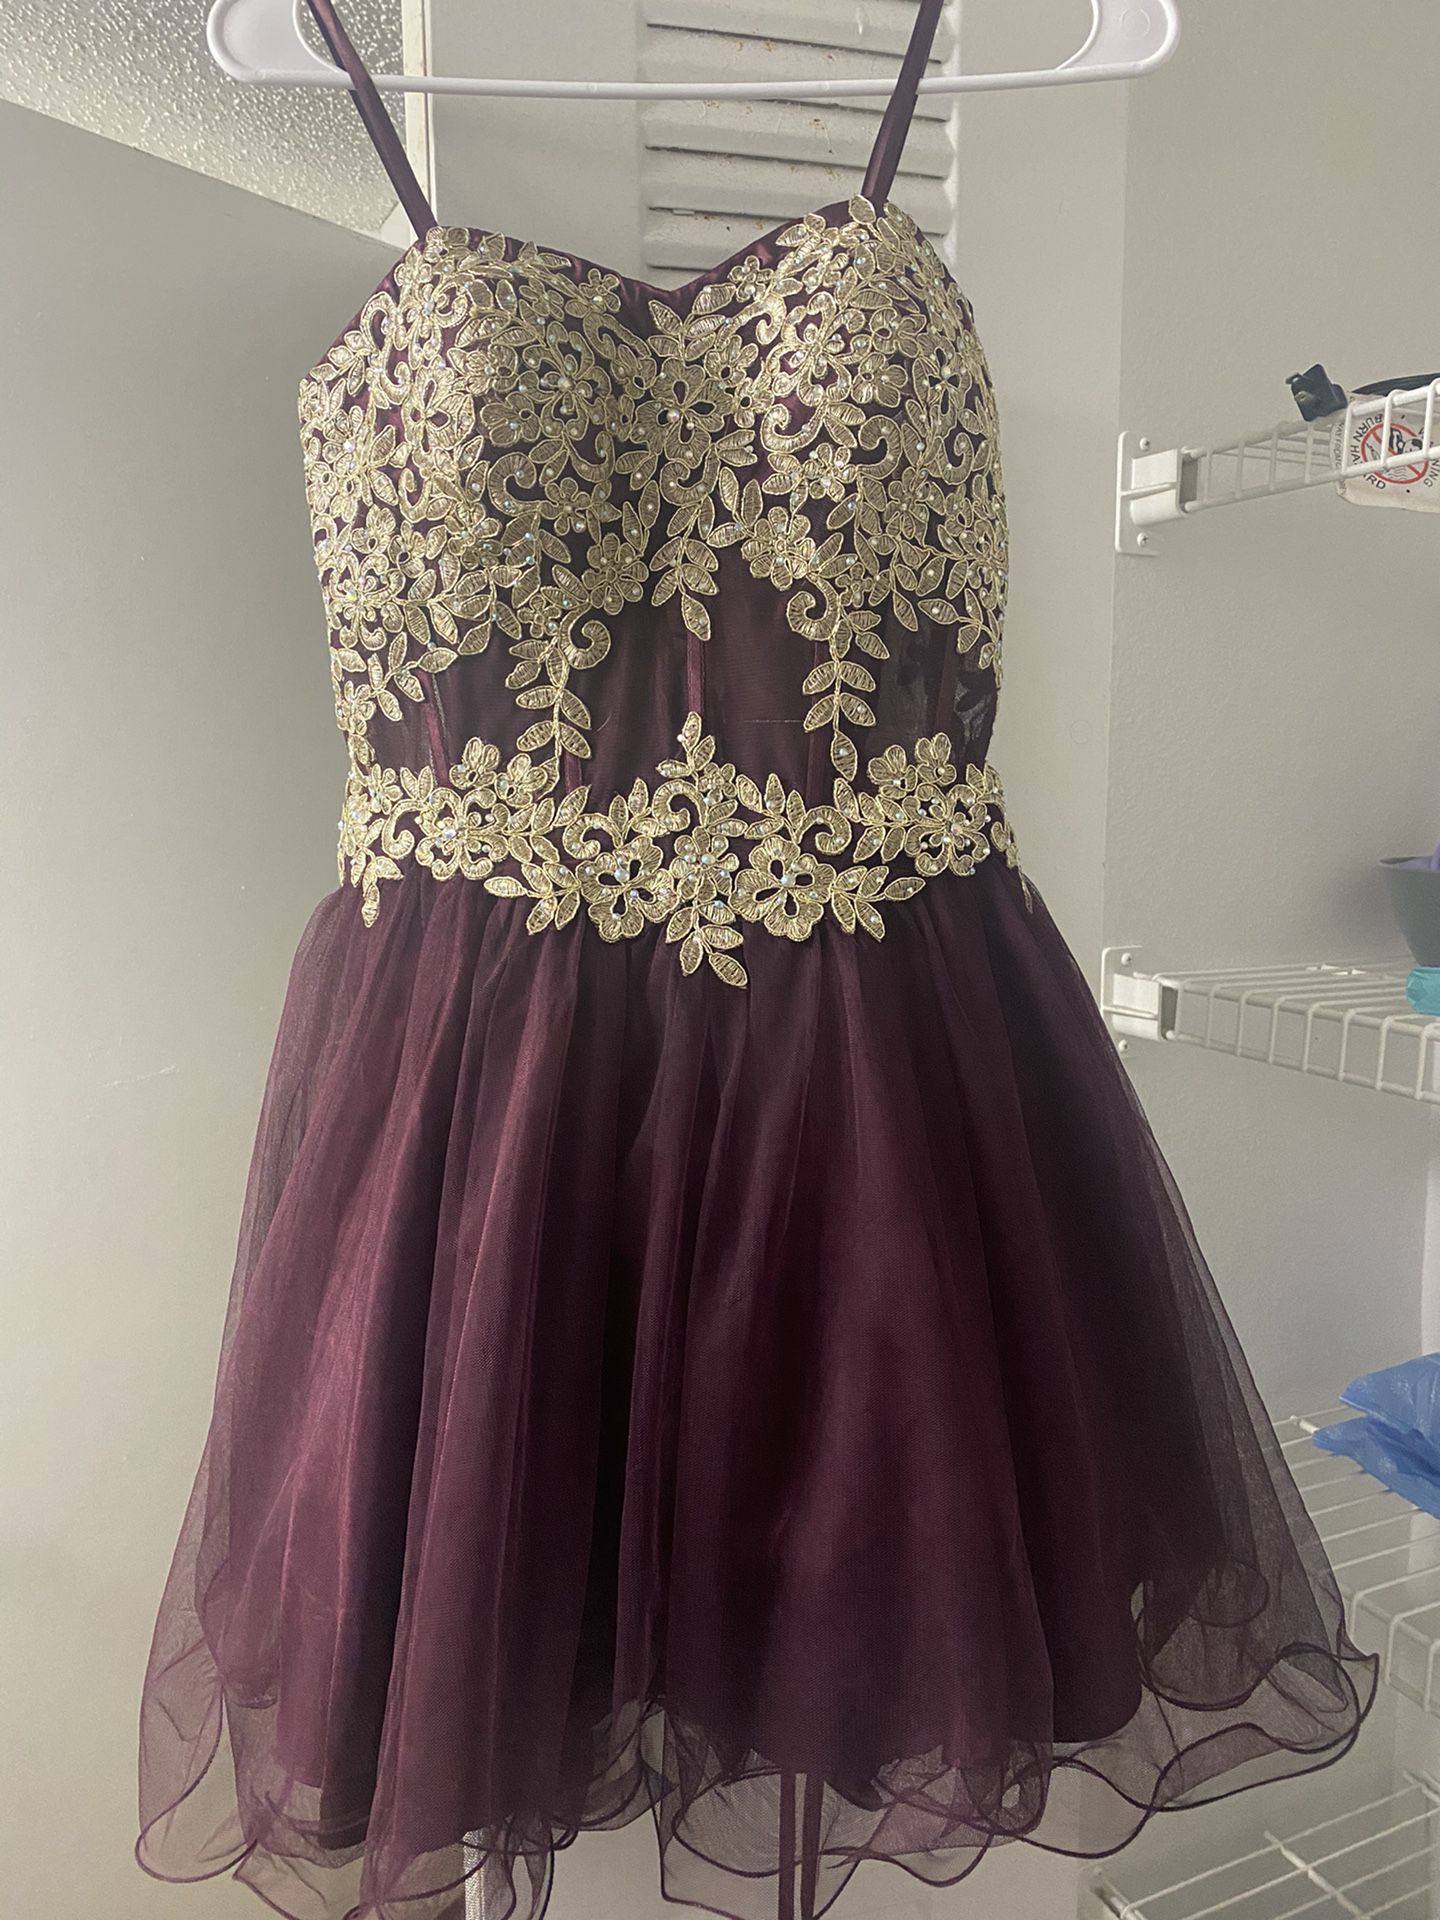 Burgundy And Gold Homecoming, Prom, or Quinceanera Dress.  